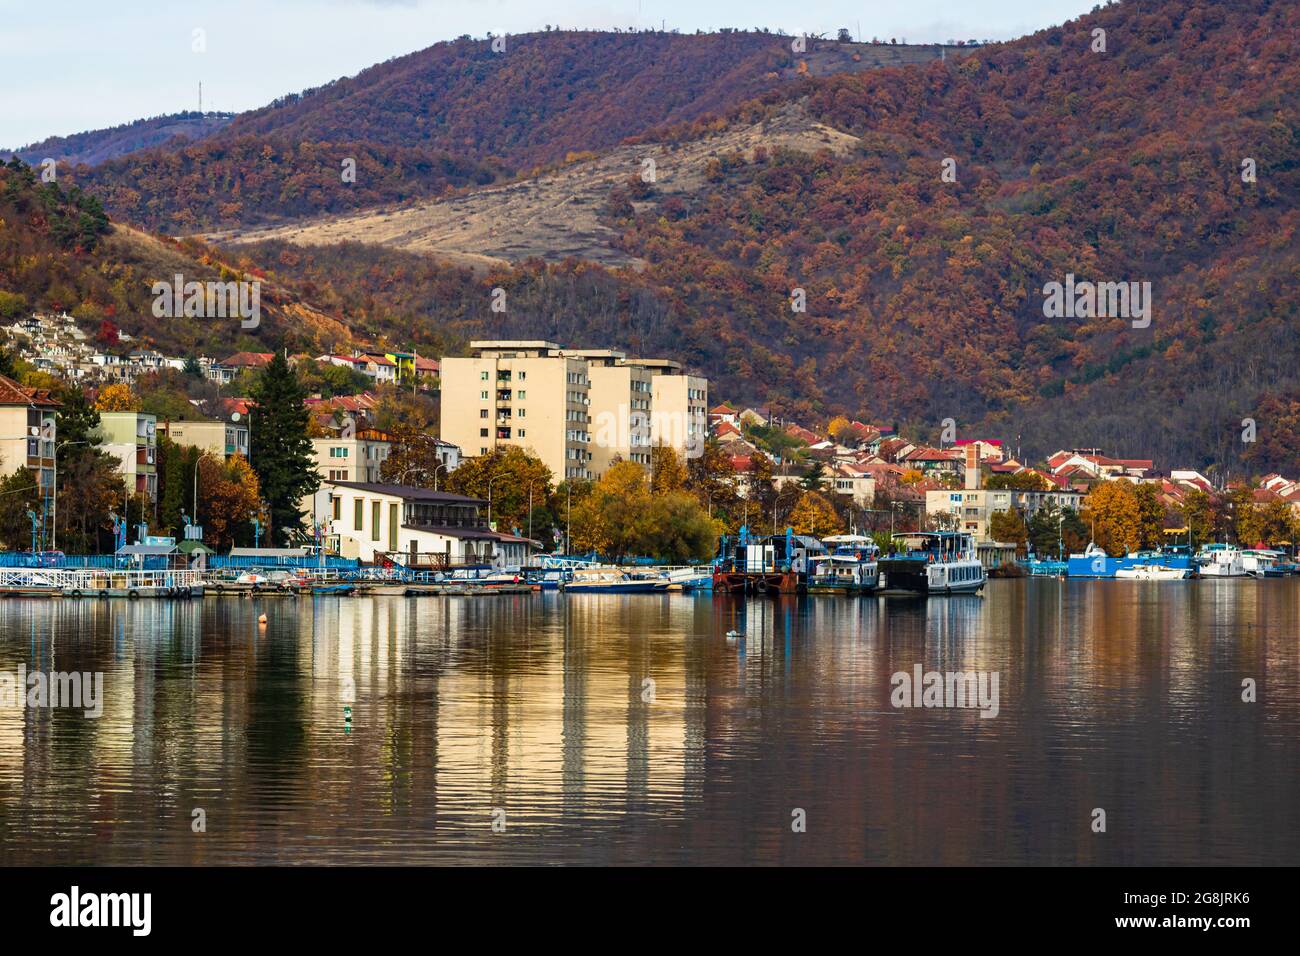 View of the Danube river and Orsova city vegetation and buildings in Orsova, Romania Stock Photo